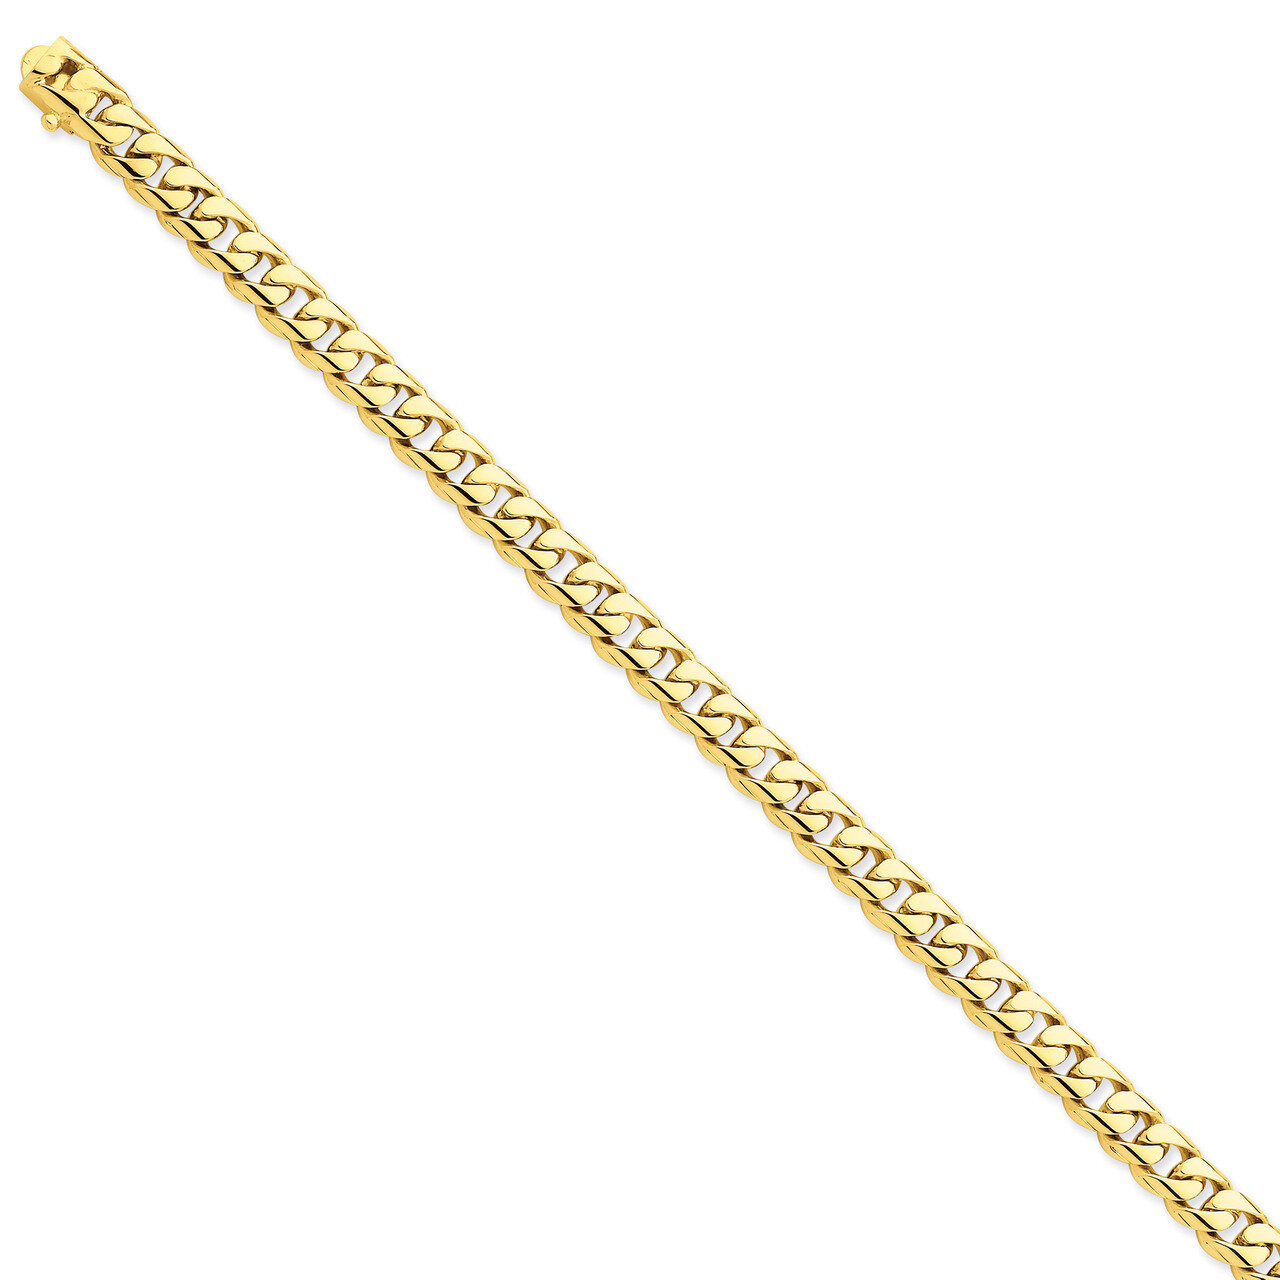 7.25mm Hand-polished Rounded Curb Chain 9 Inch 14k Gold LK124-9